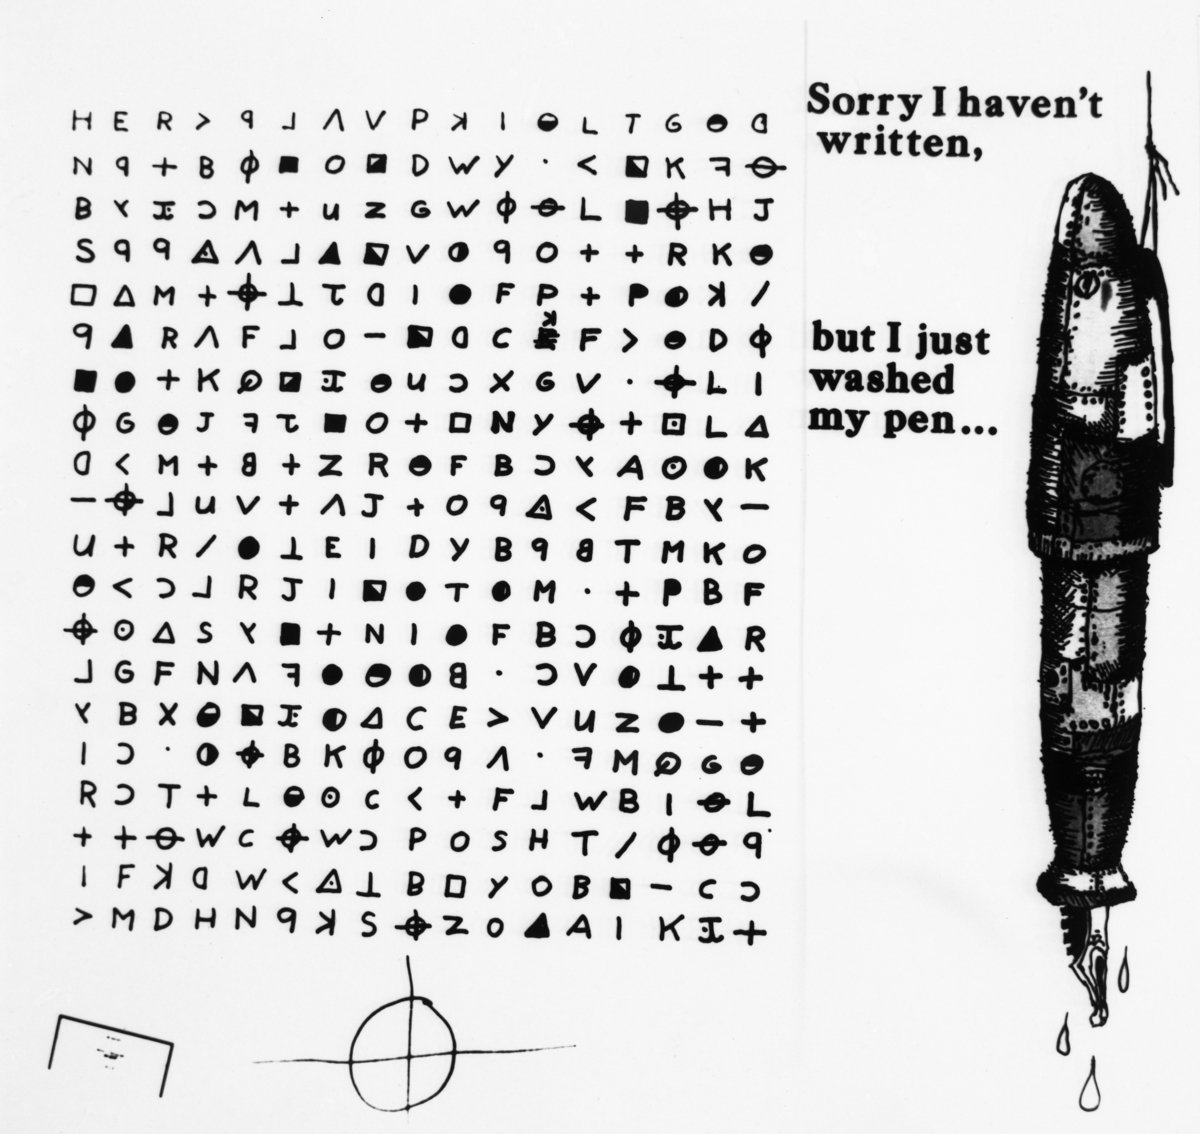 The Zodiac Killer is believed by some to have drawn inspiration from comic books